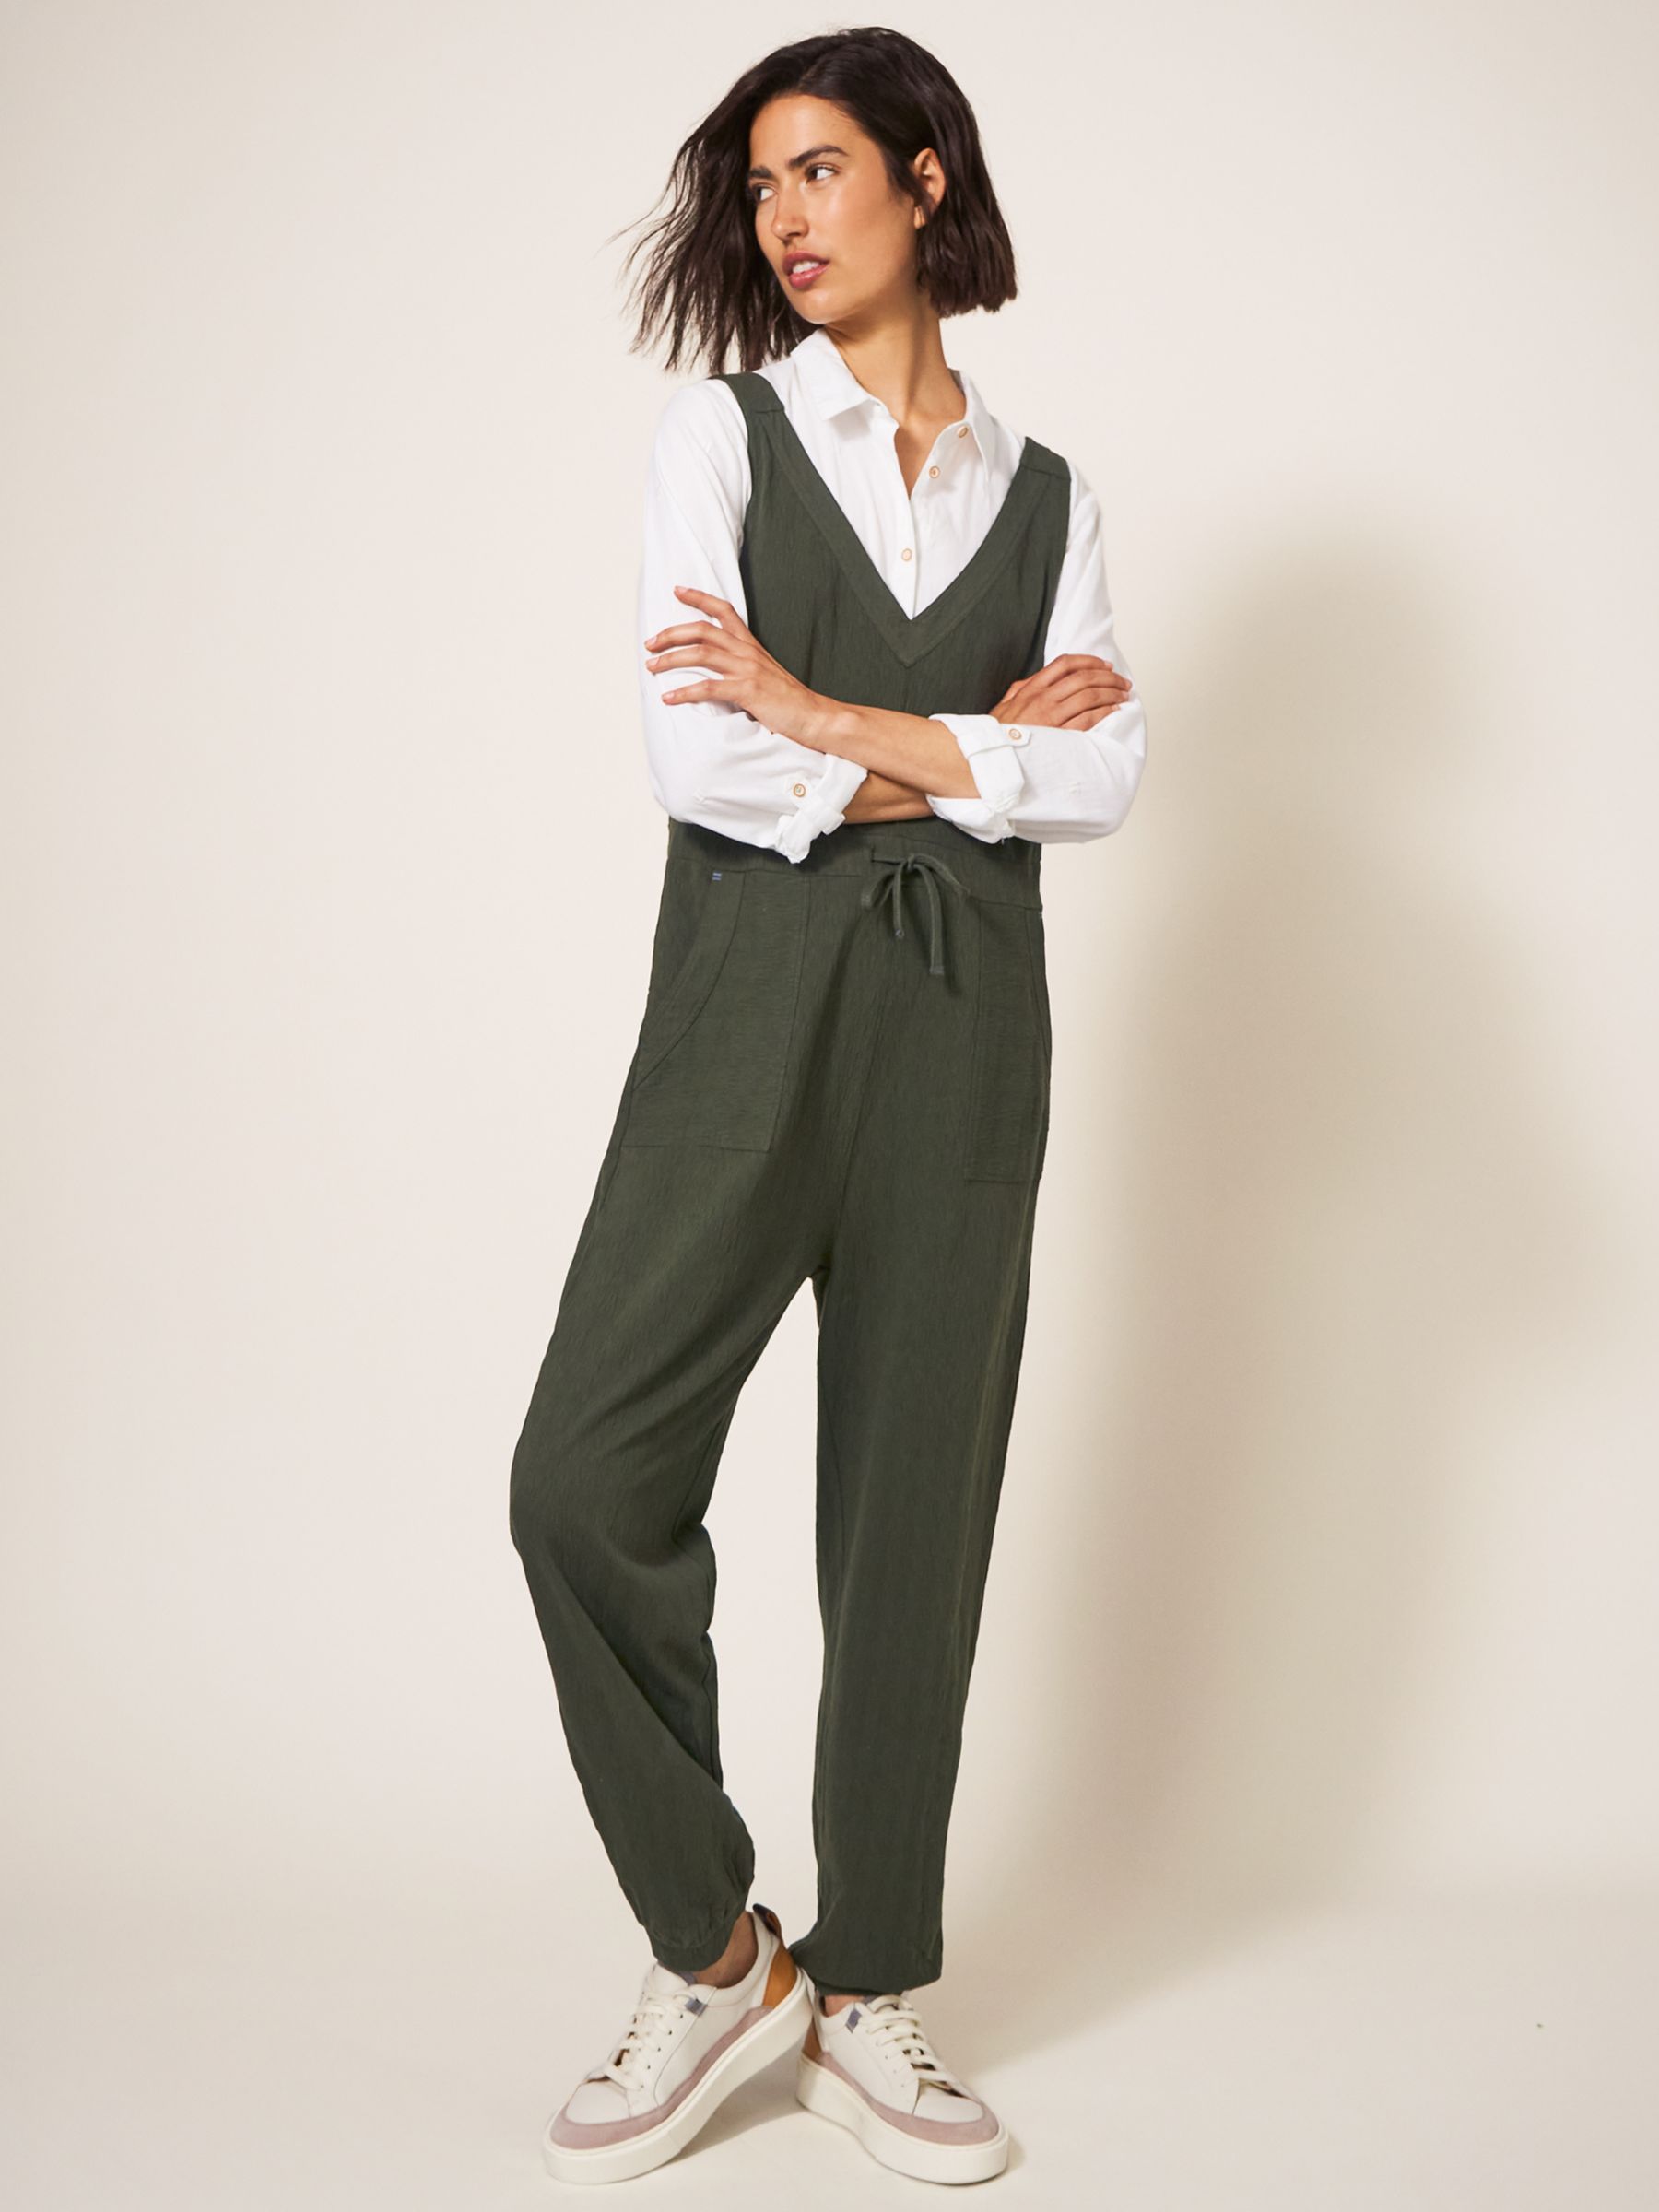 Phase Eight Petite Lissia Jumpsuit, Apple Green at John Lewis